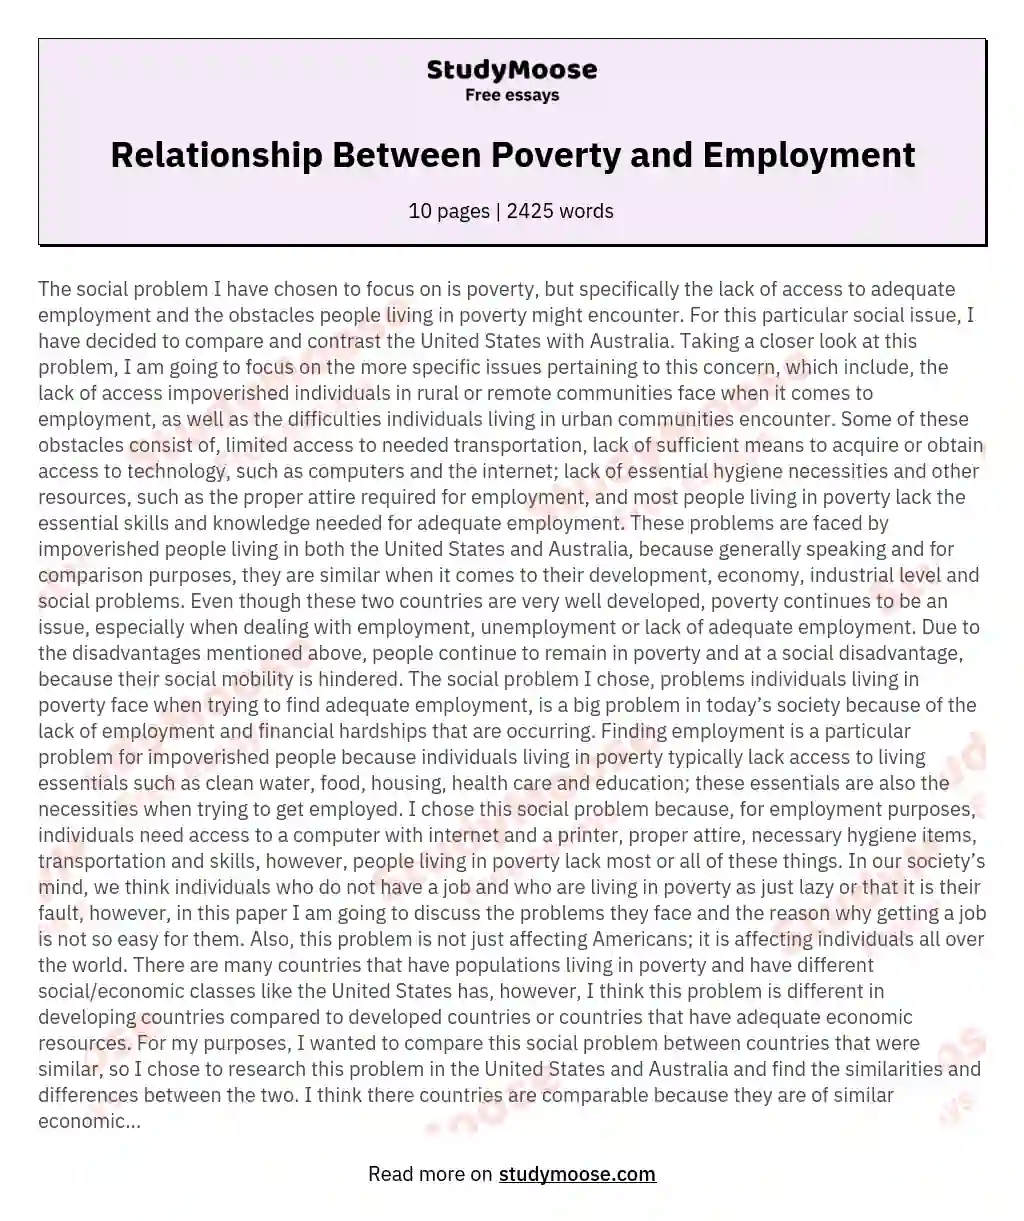 Relationship Between Poverty and Employment